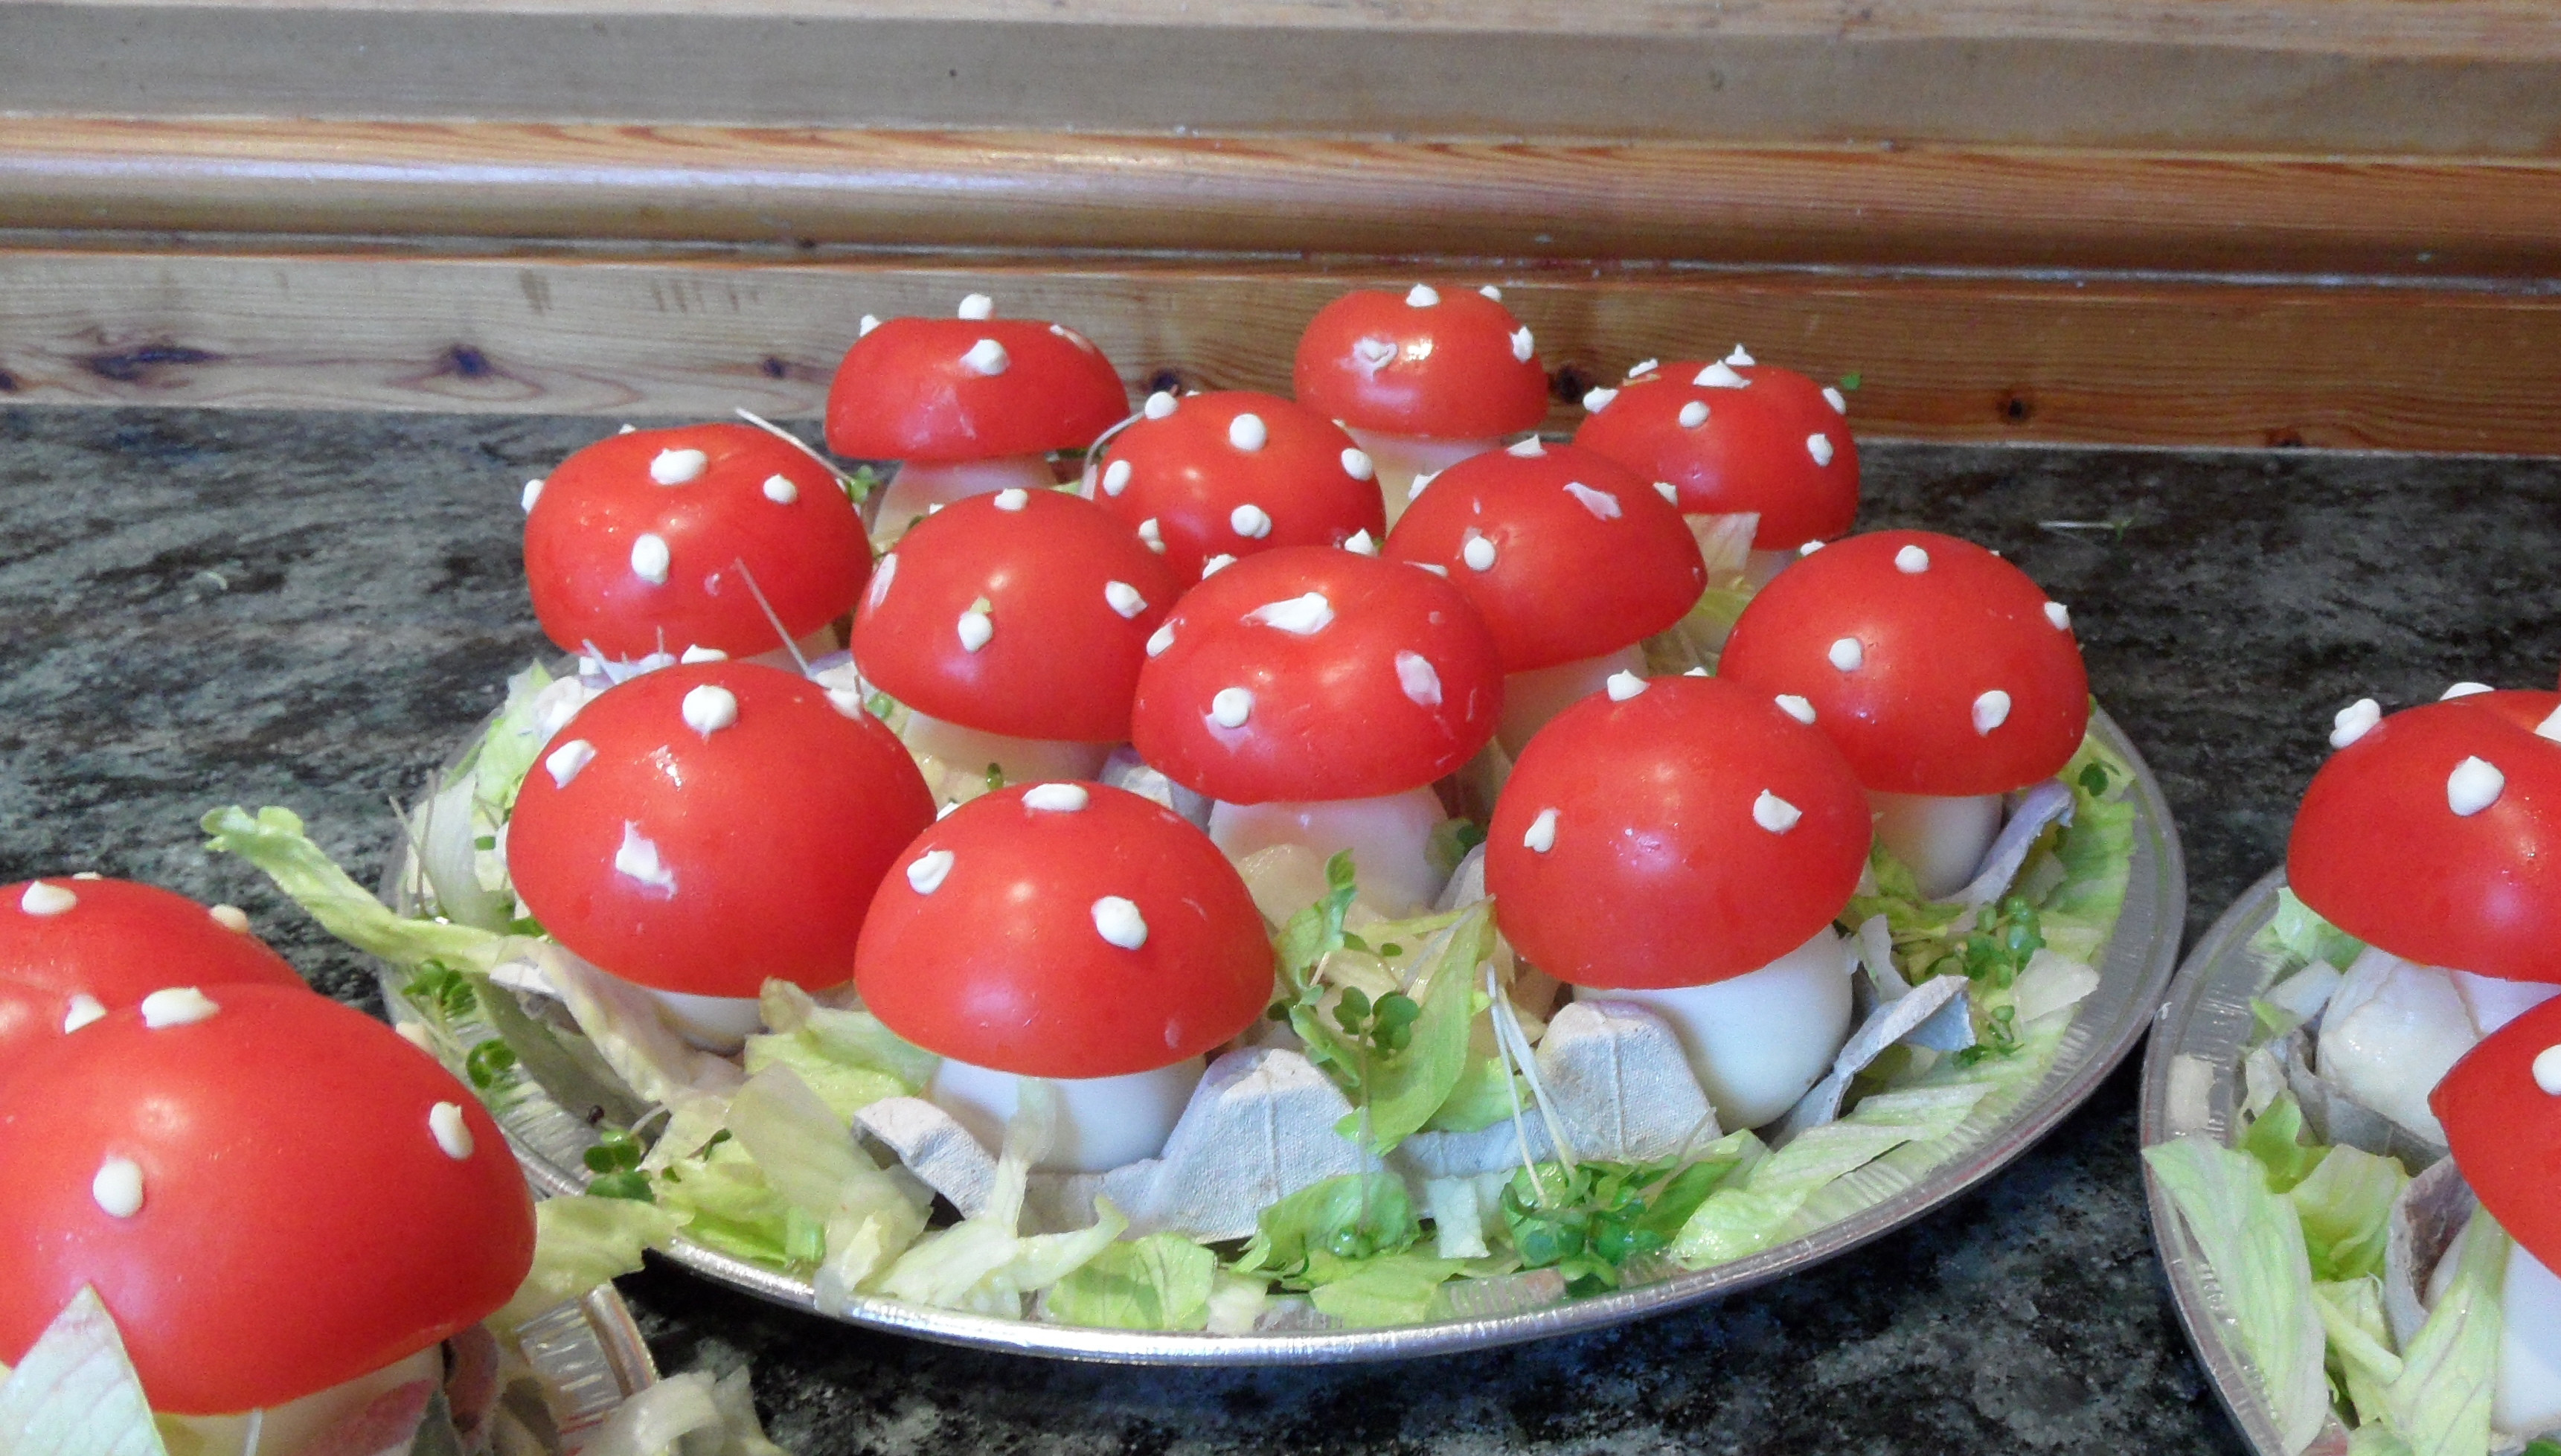 Mad Hatter Tea Party Food Ideas
 Themed Party Food Ideas Magic Toadstools